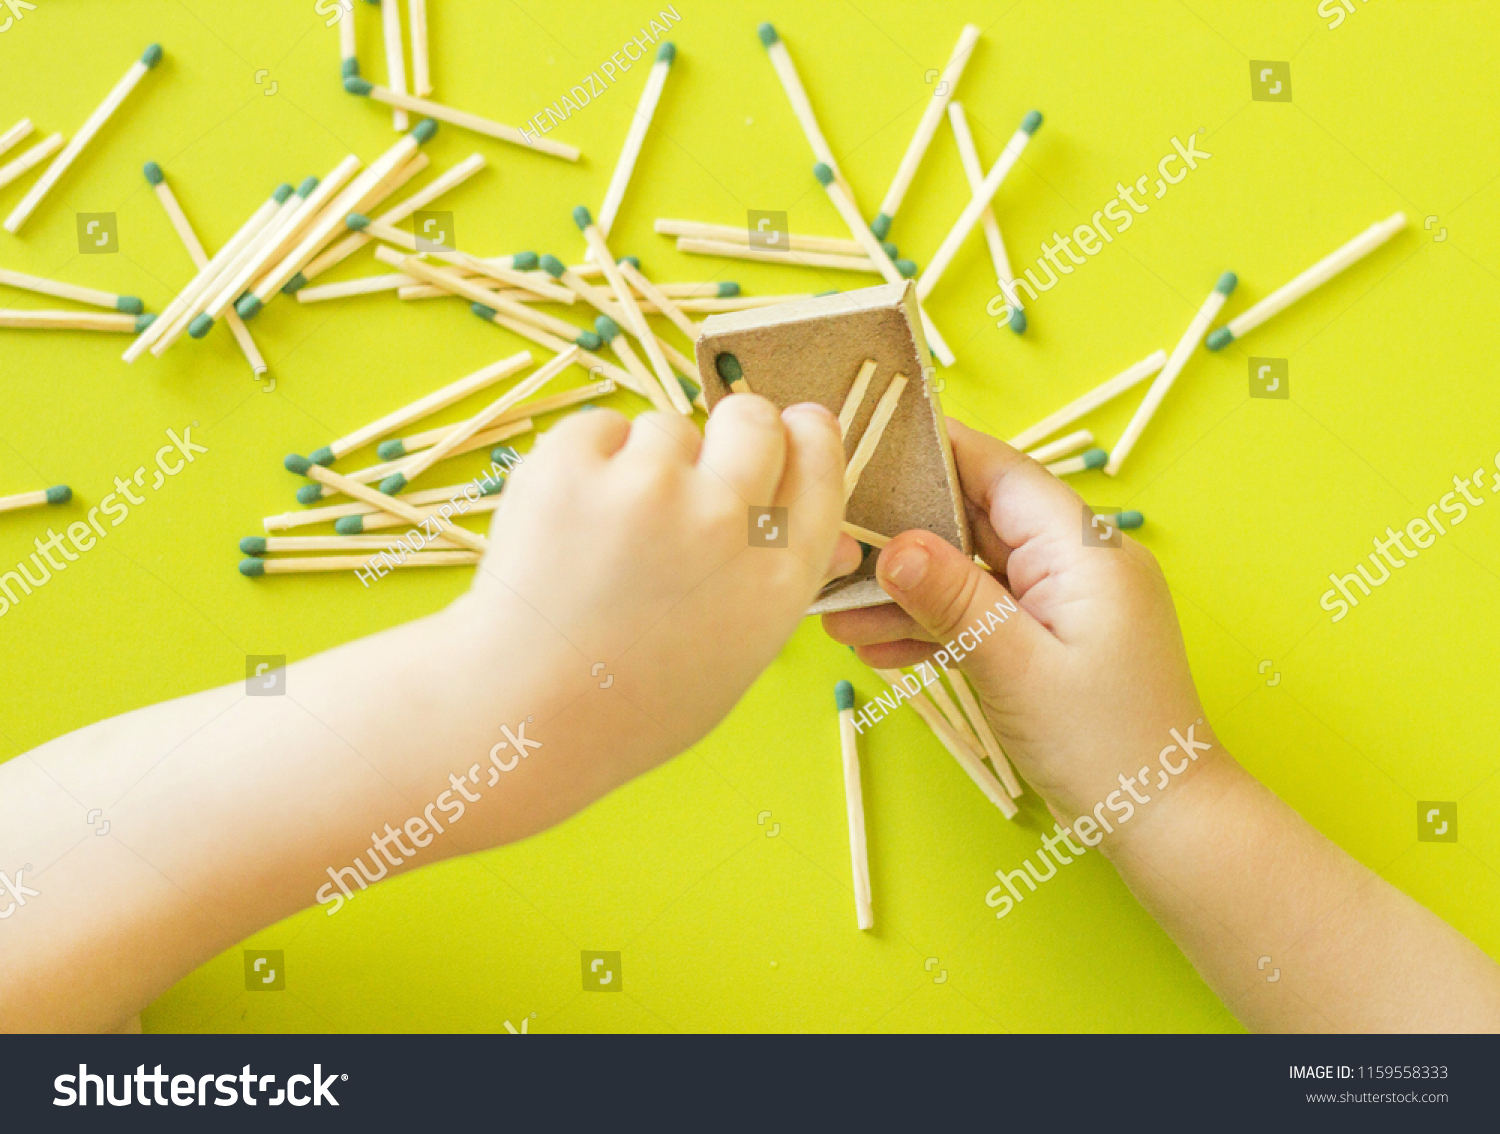 A small child plays with matches, matches matches into boxes, close-ups, fire, lucifer match, hand #1159558333